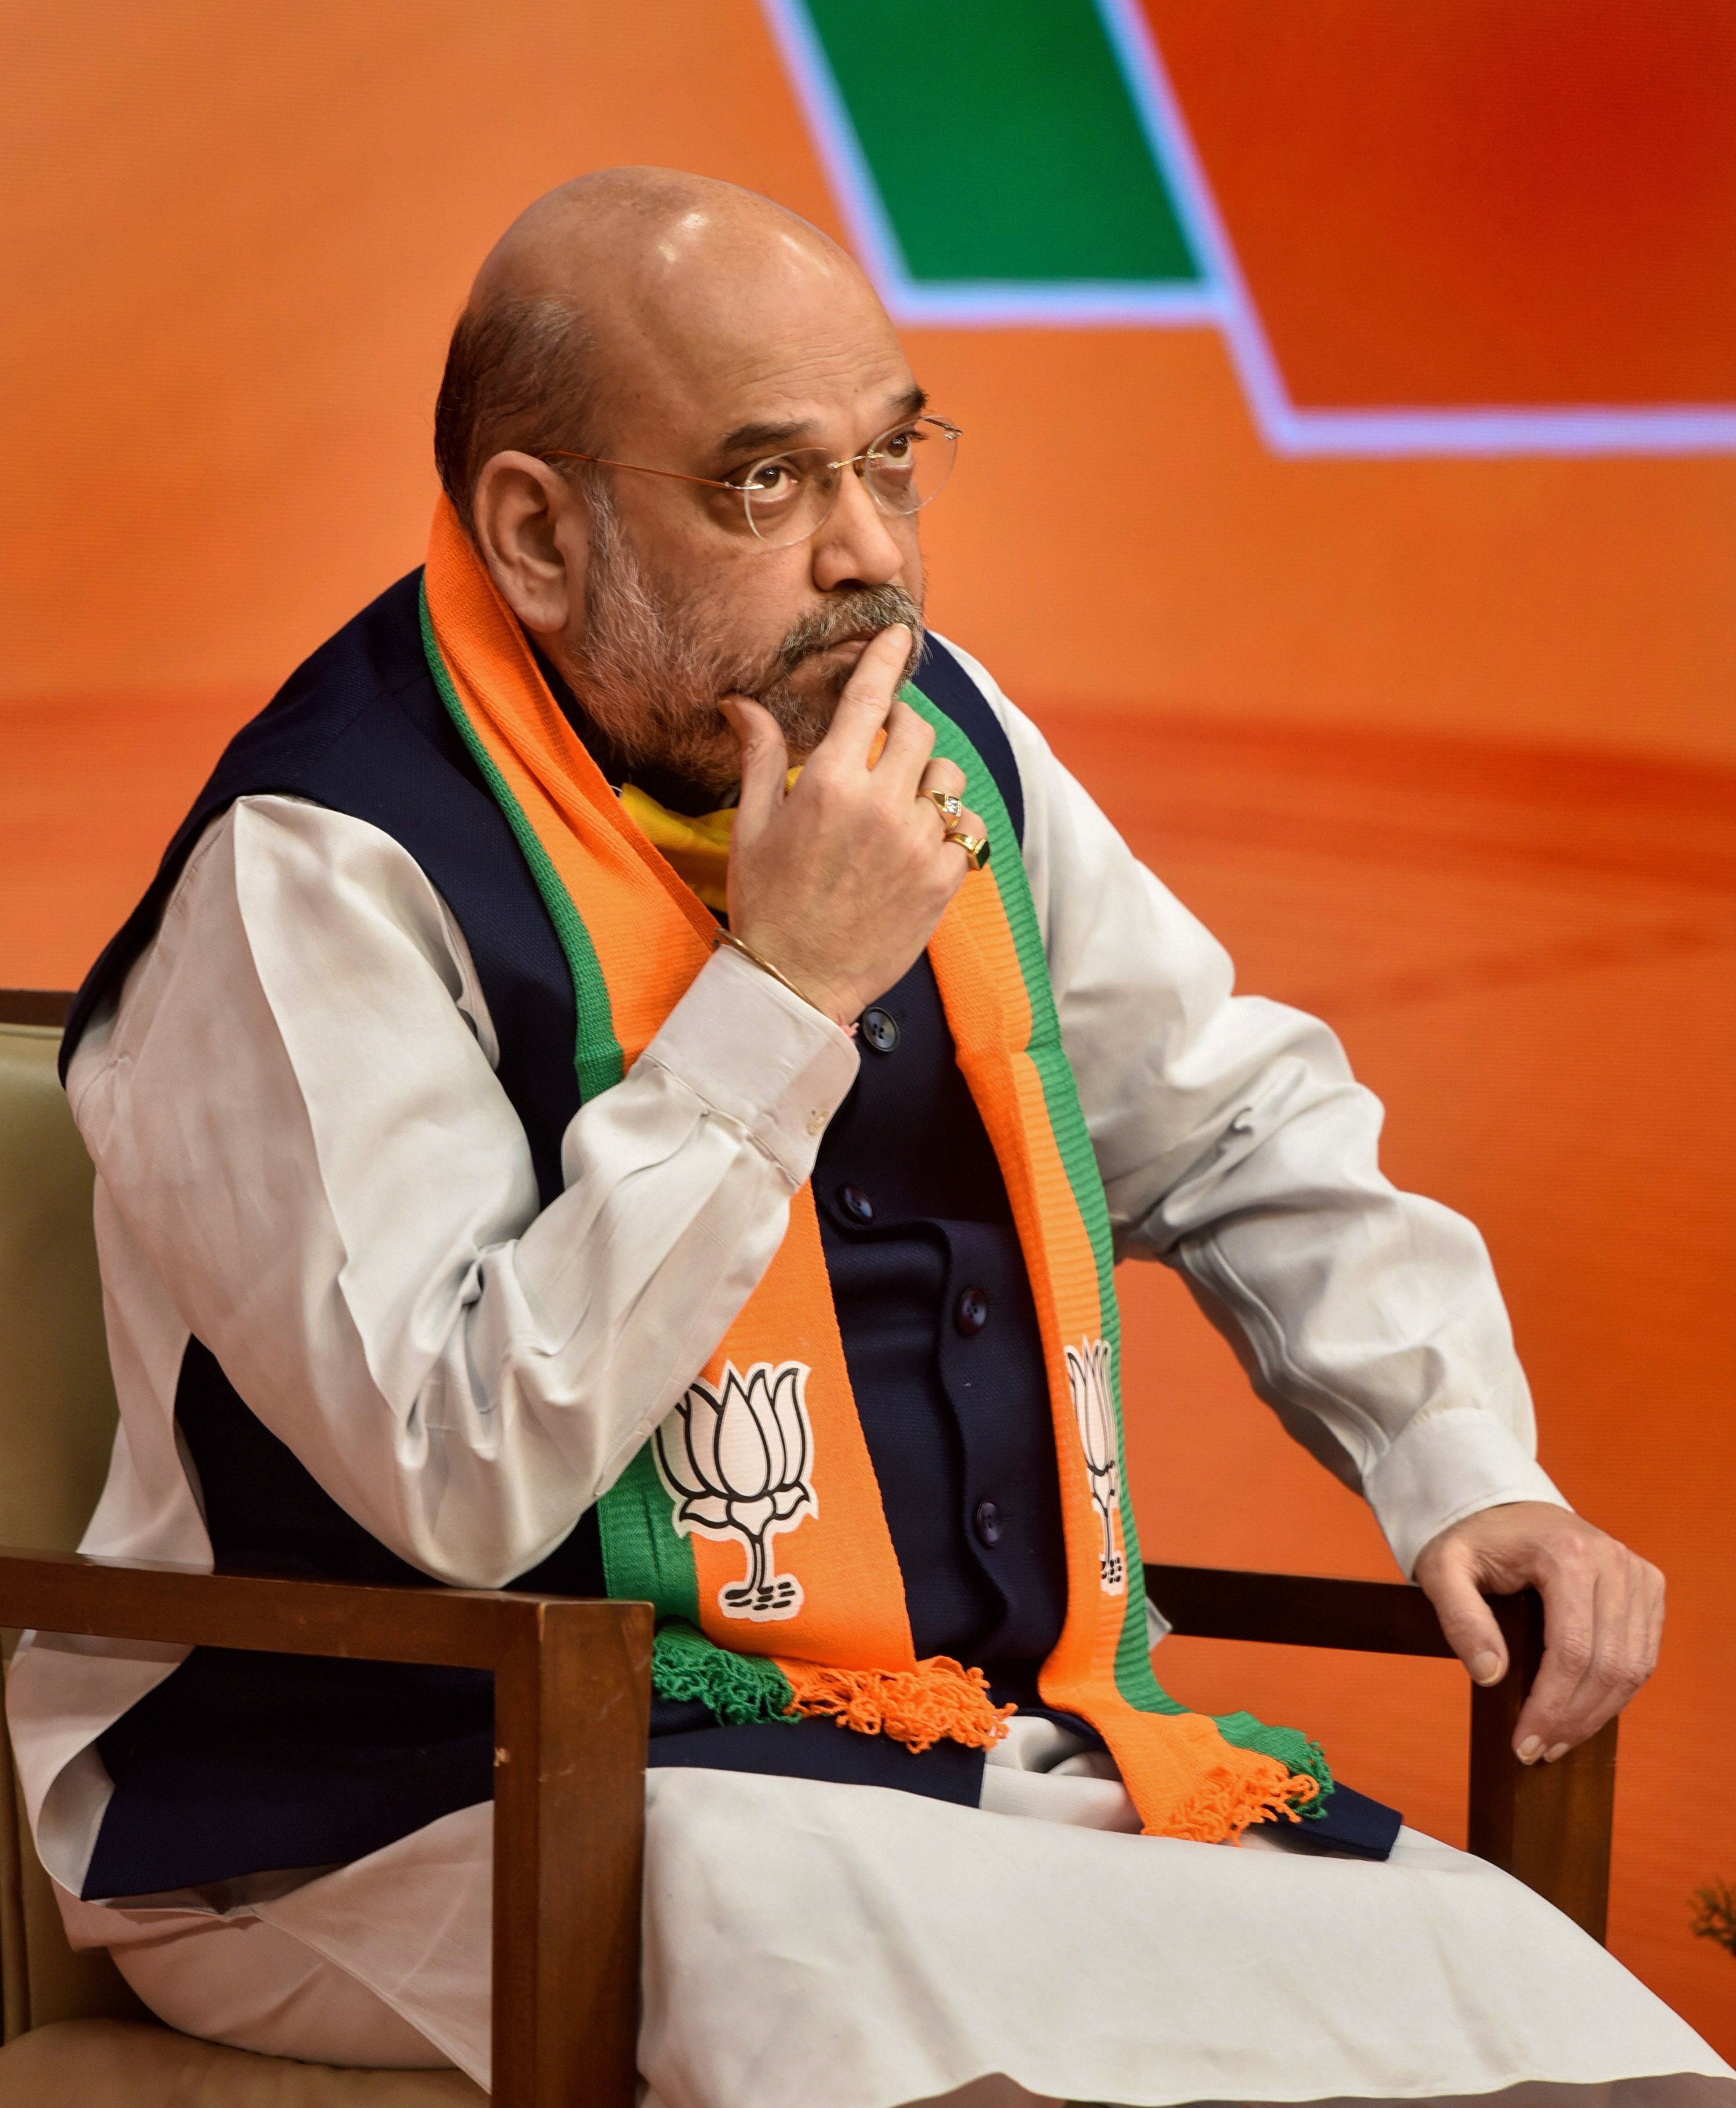 Union Home Minister Amit Shah during the 'West Bengal Jan Samvad' rally via video conferencing during the ongoing COVID-19 lockdown. Credit: PTI Photo